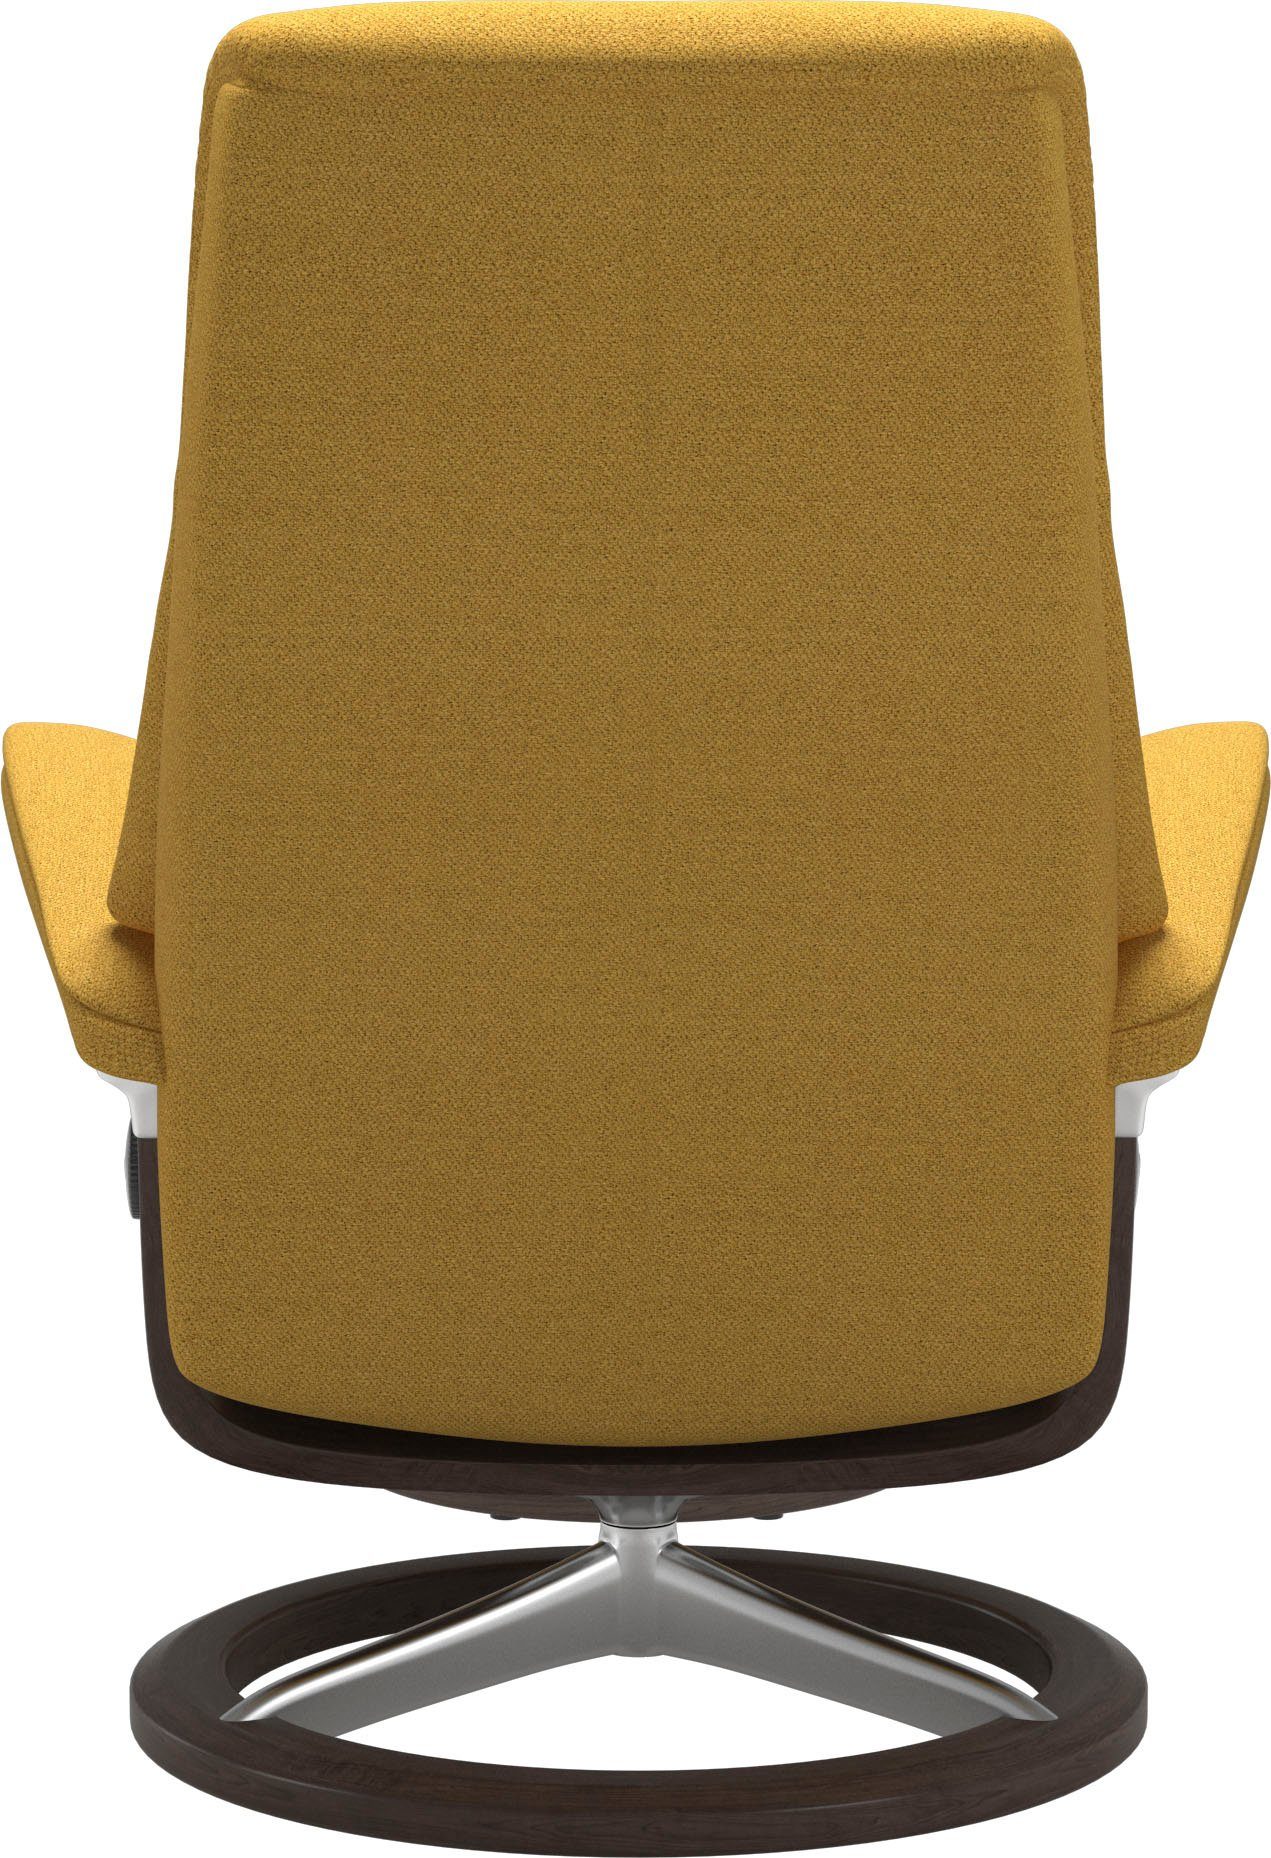 Stressless® Relaxsessel Größe Base, View, S,Gestell mit Signature Wenge